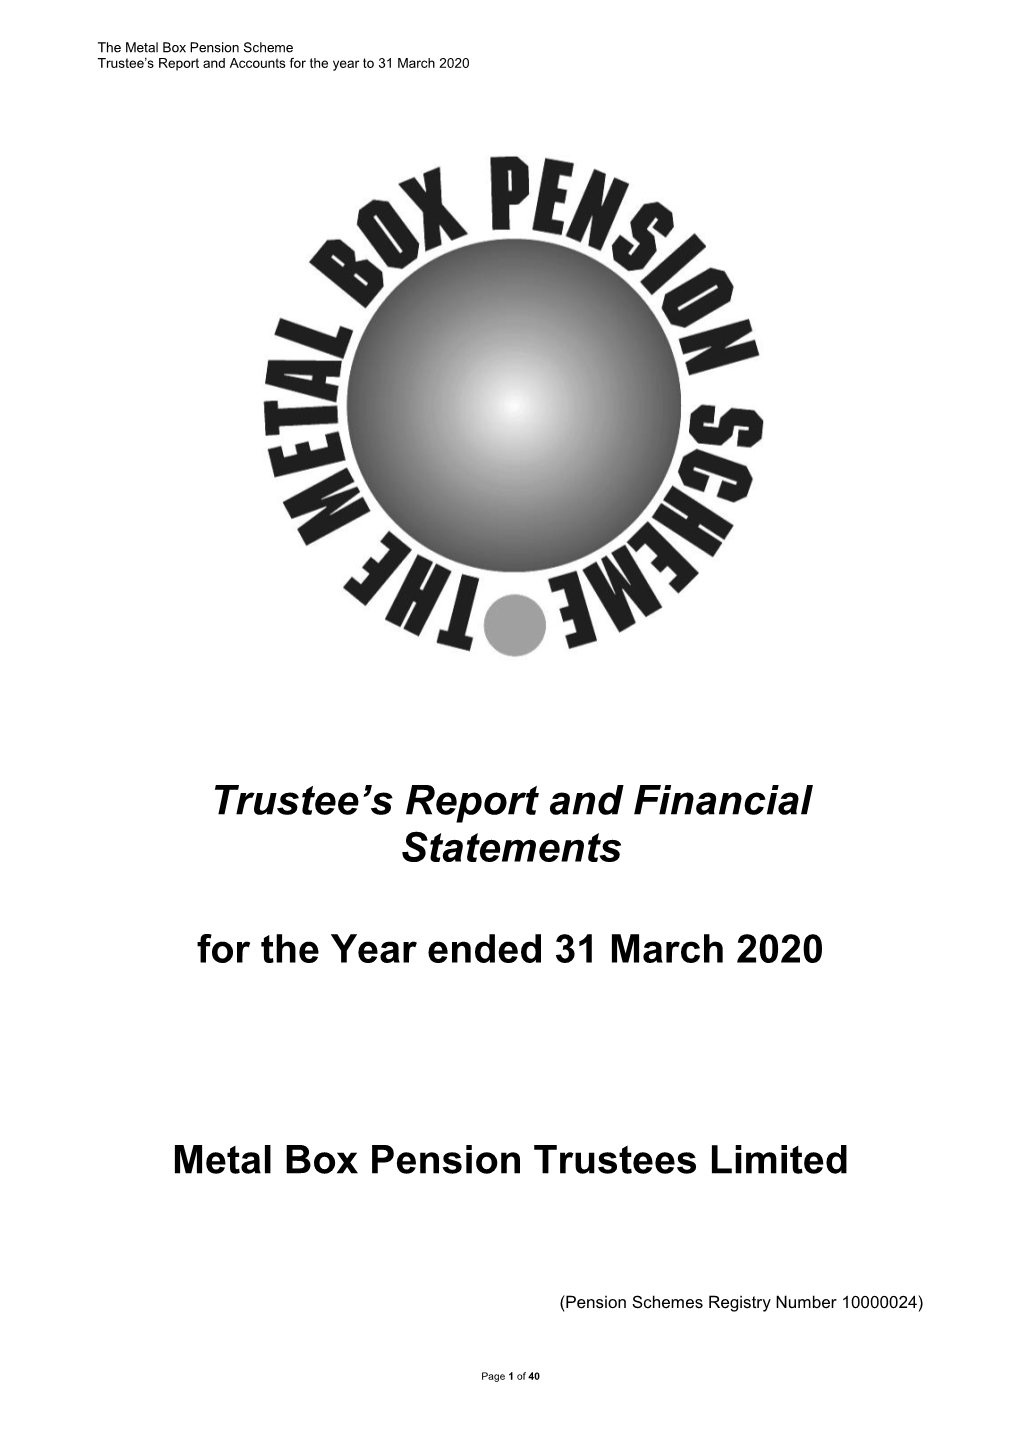 Trustee's Report and Financial Statements